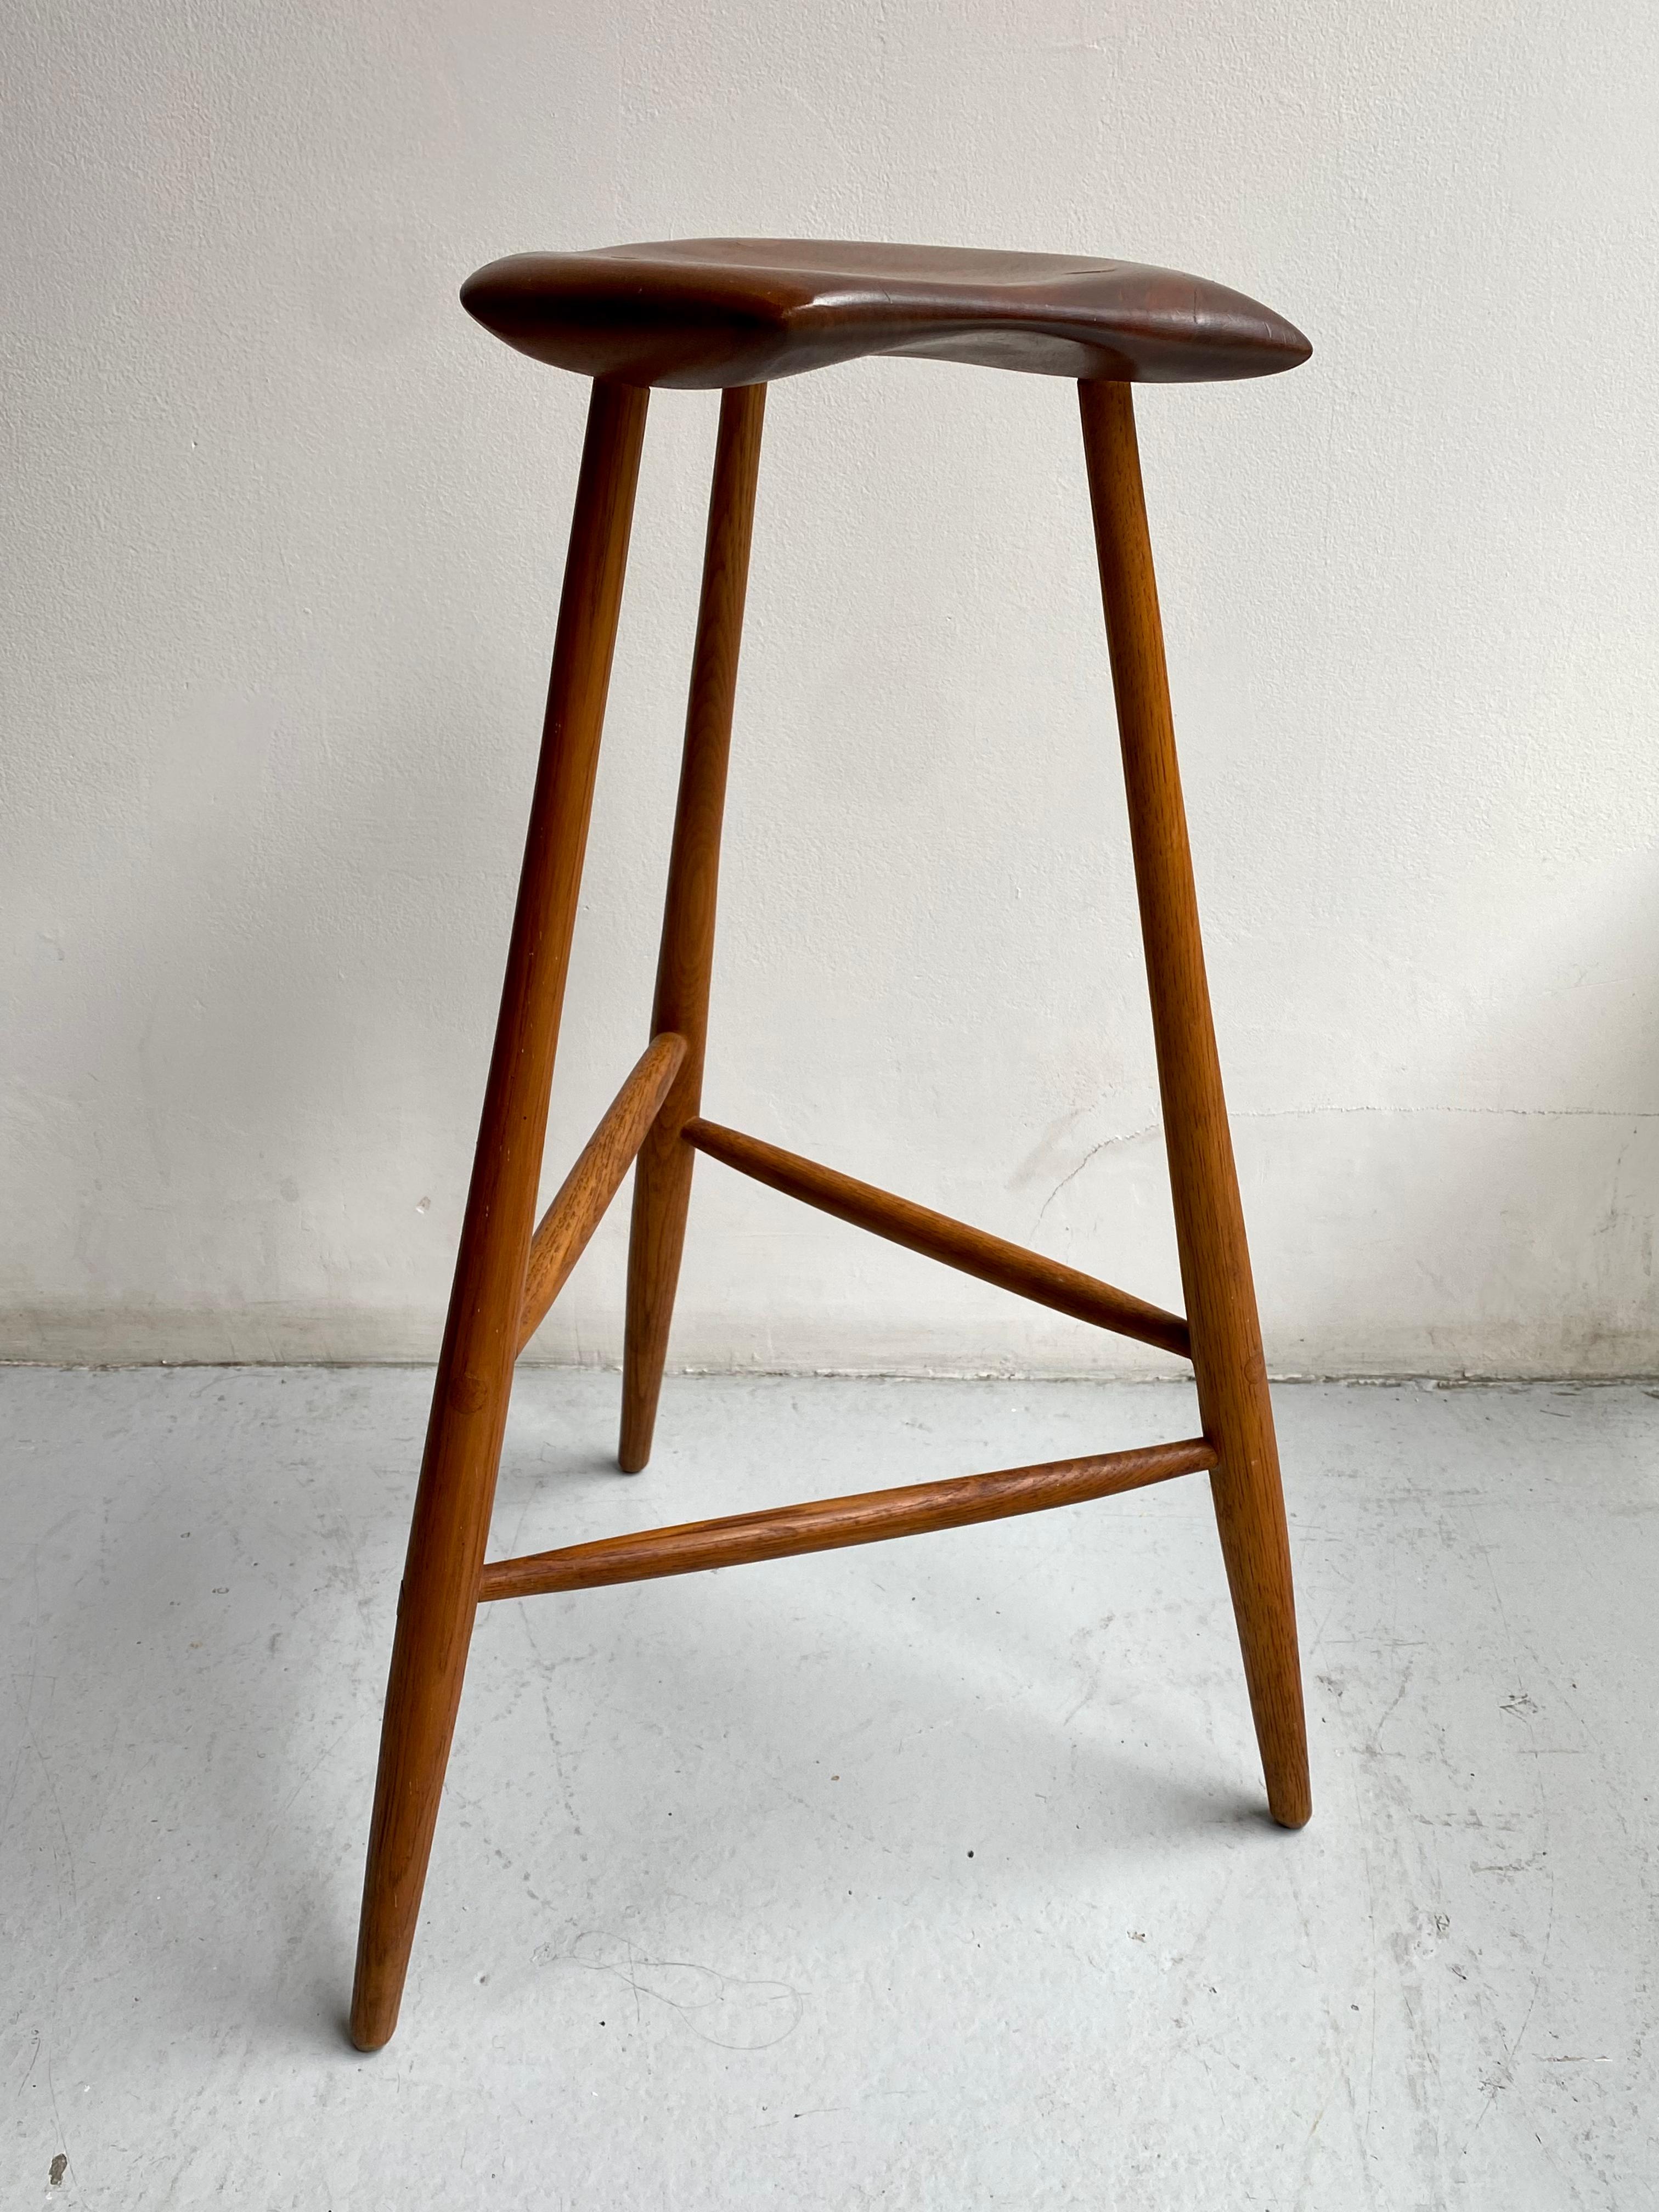 Designed in 1958, Esherick’s three-legged stool is one of his most recognizable pieces. Since the seat's shape was informed by the grain of each piece of walnut, no two are alike. Carved signature and date on the bottom of the seat.